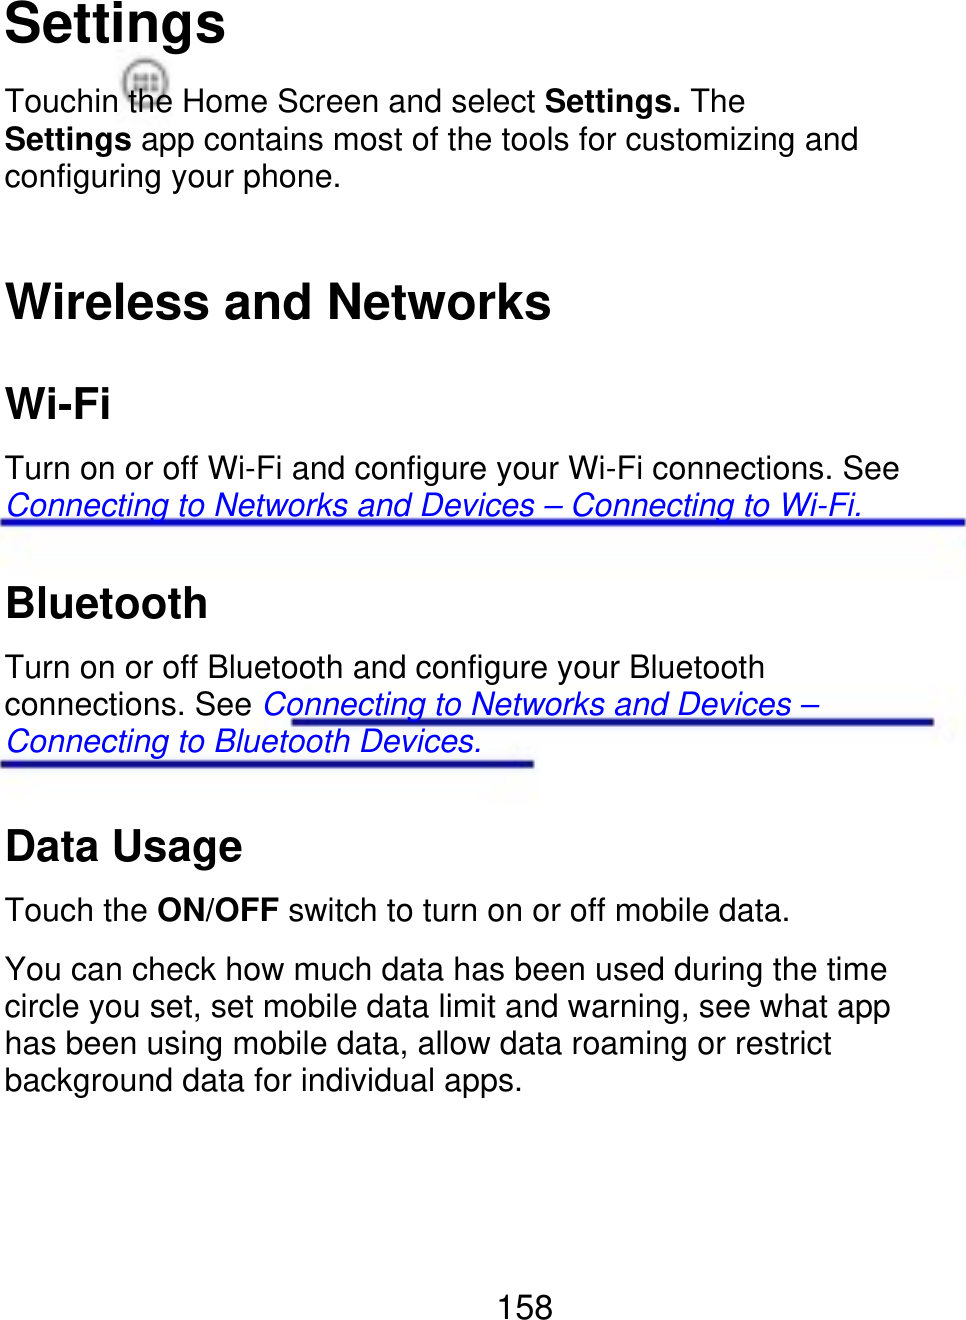 Settings Touchin the Home Screen and select Settings. The Settings app contains most of the tools for customizing and configuring your phone. Wireless and Networks Wi-Fi Turn on or off Wi-Fi and configure your Wi-Fi connections. See Connecting to Networks and Devices – Connecting to Wi-Fi. Bluetooth Turn on or off Bluetooth and configure your Bluetooth connections. See Connecting to Networks and Devices – Connecting to Bluetooth Devices. Data Usage Touch the ON/OFF switch to turn on or off mobile data. You can check how much data has been used during the time circle you set, set mobile data limit and warning, see what app has been using mobile data, allow data roaming or restrict background data for individual apps. 158 